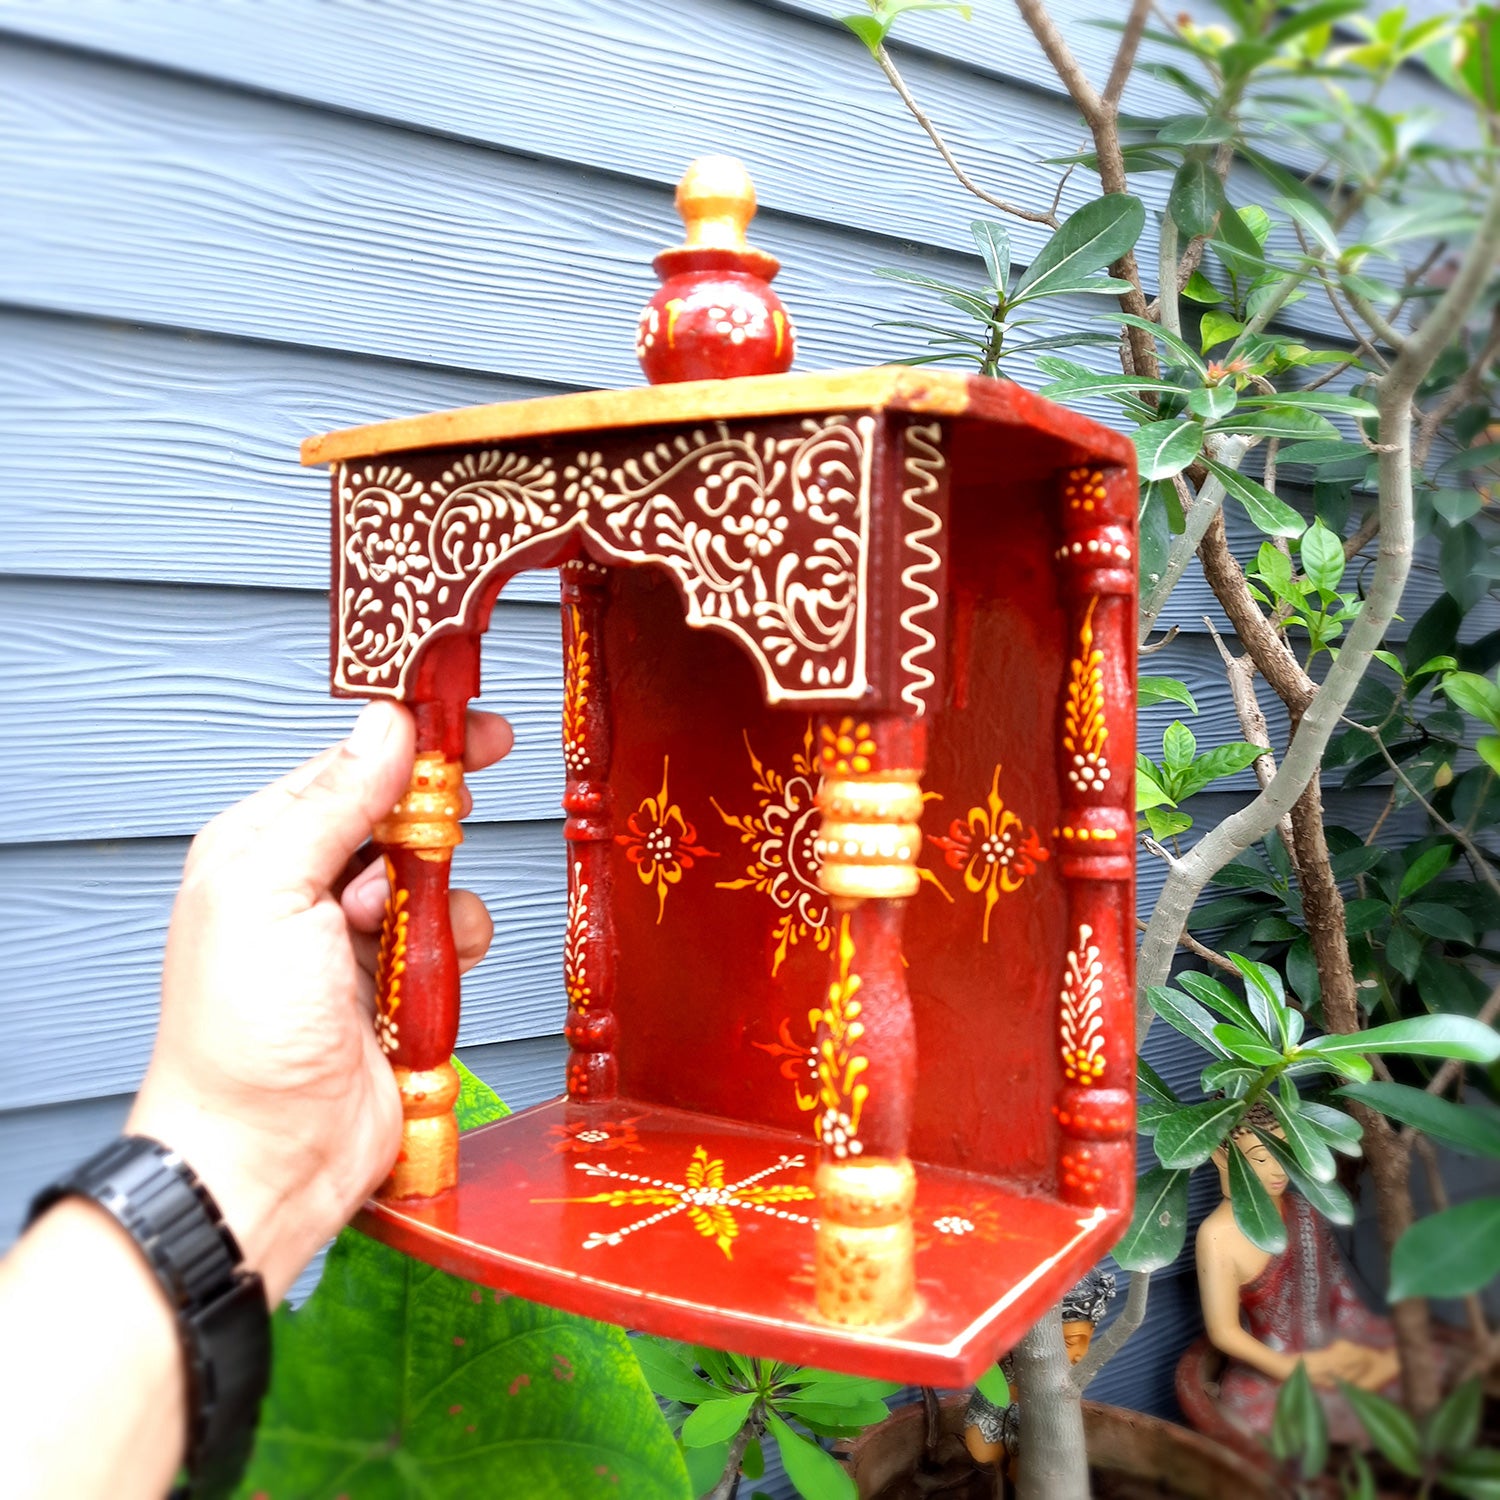 Pooja Temple Wooden | God Temple For Home | Puja Mandir Stand | Pooja Unit Small Wall Mounted – For Ghar, Office, Shop - 12 Inch - Apkamart